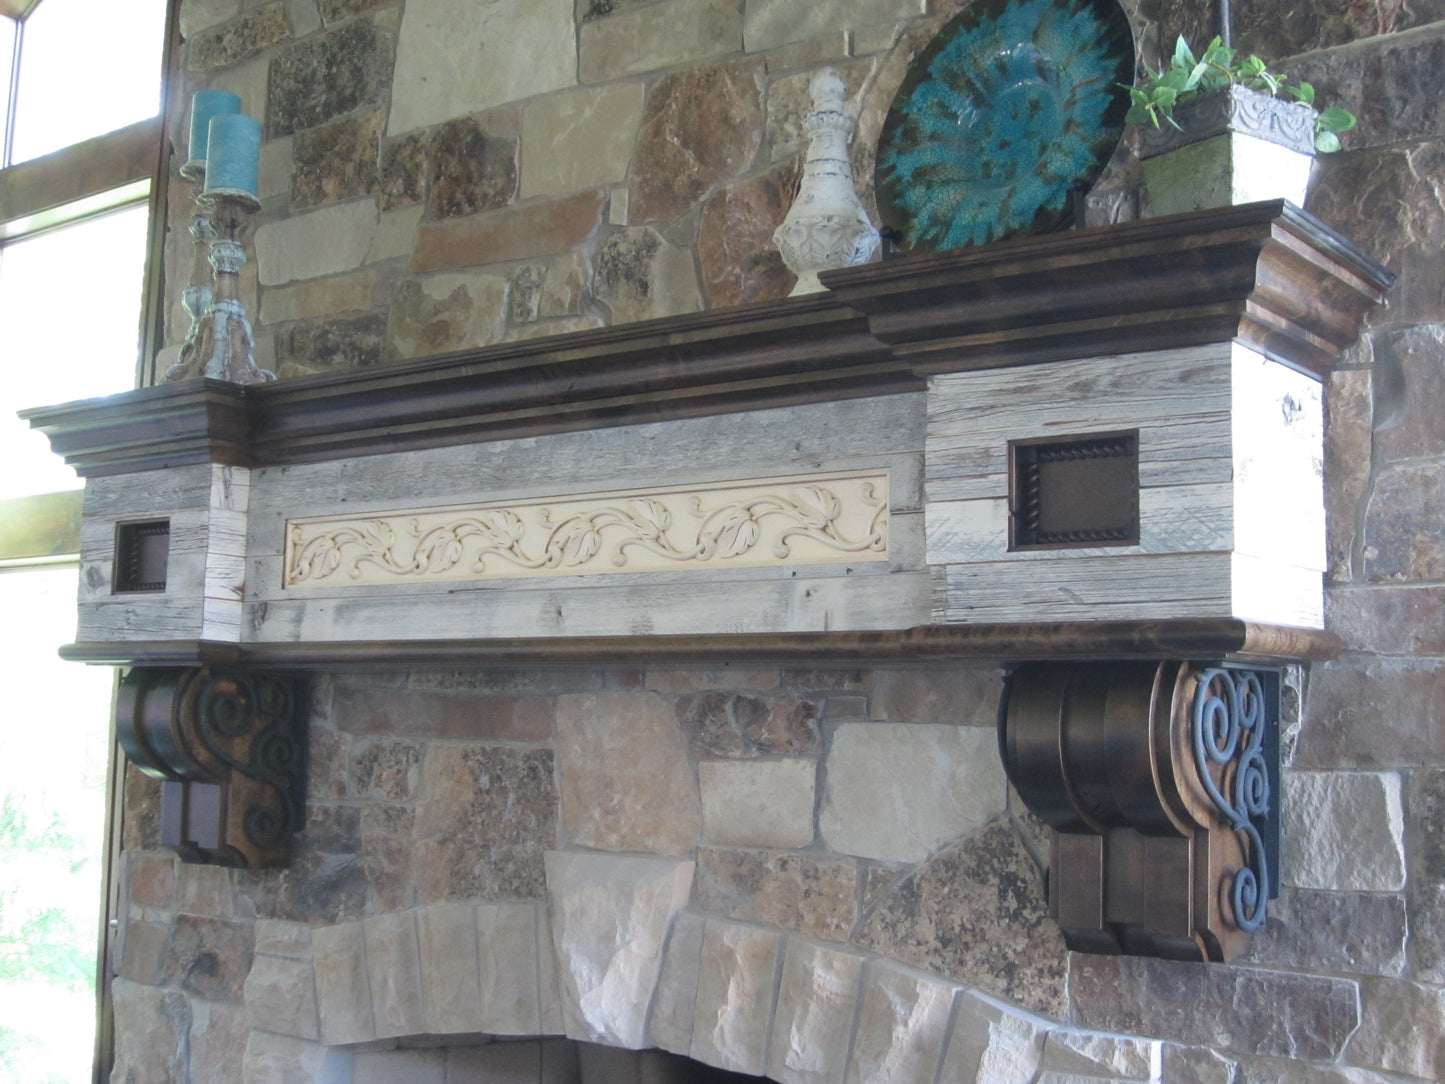 Vail Fireplace Mantel - Classic Wrought Iron Scrolling